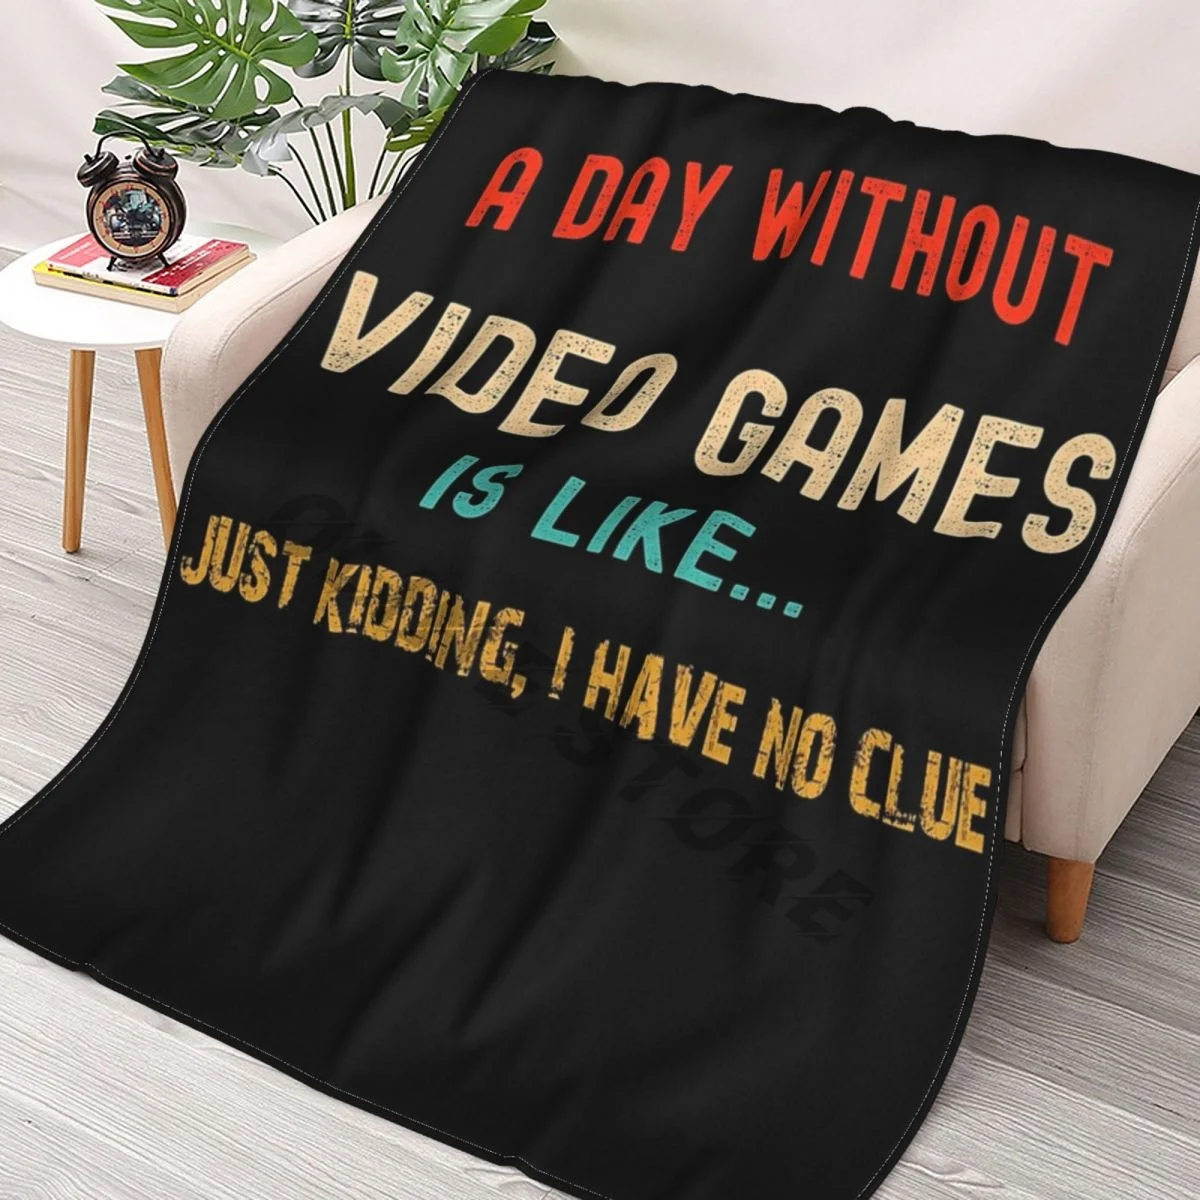 

A Day Without Video Games Is Like Just Kidding I Have No Idea, Funny Gamer Saying Throws Blankets Collage Flannel Warm picnic